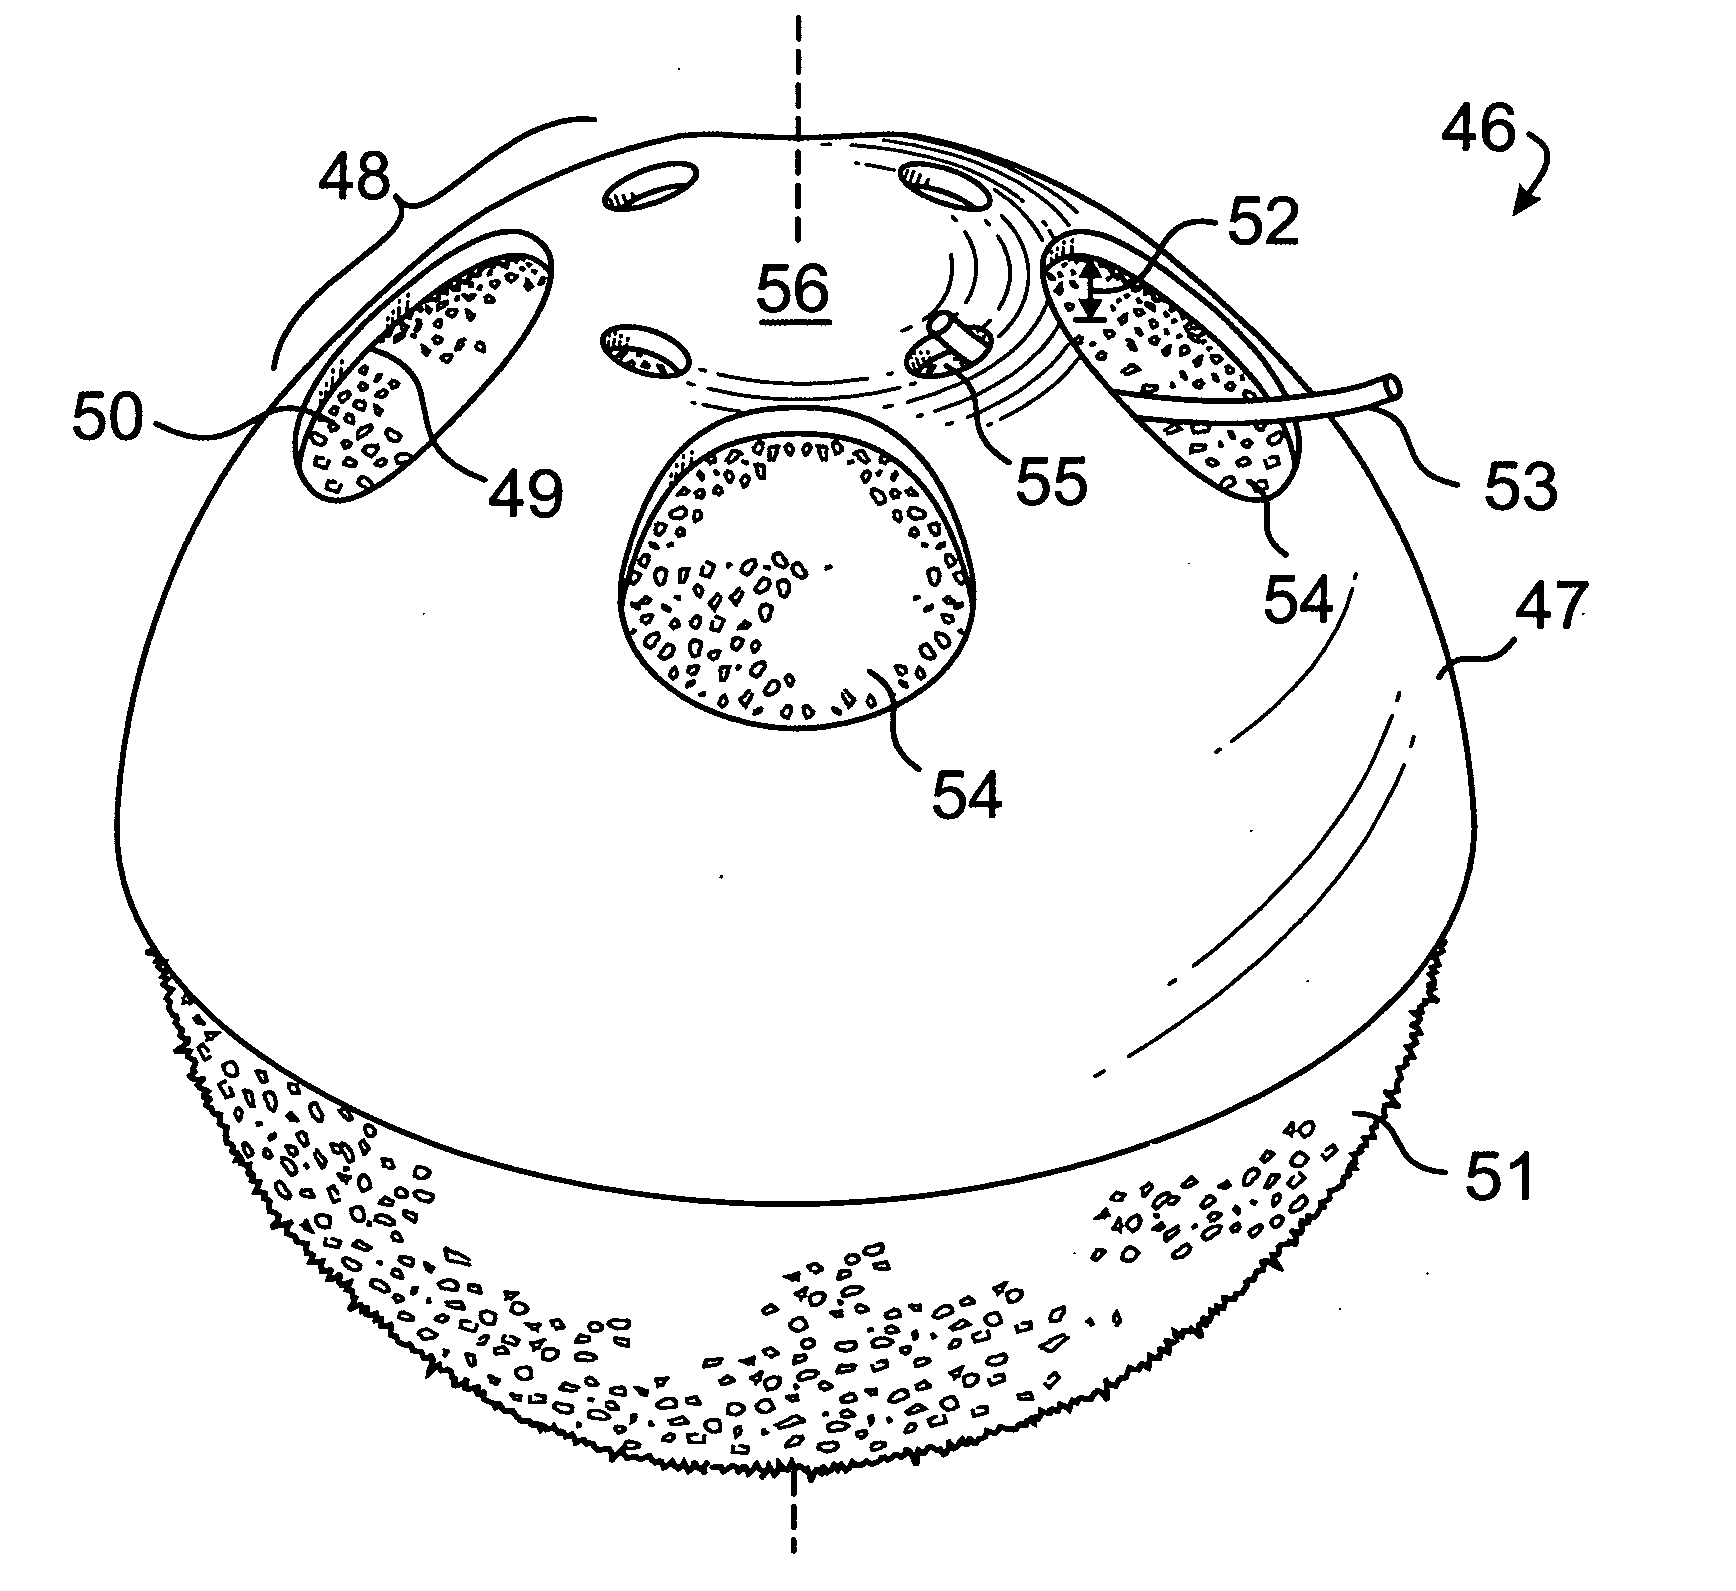 Vaulted perforated coating for orbital implants